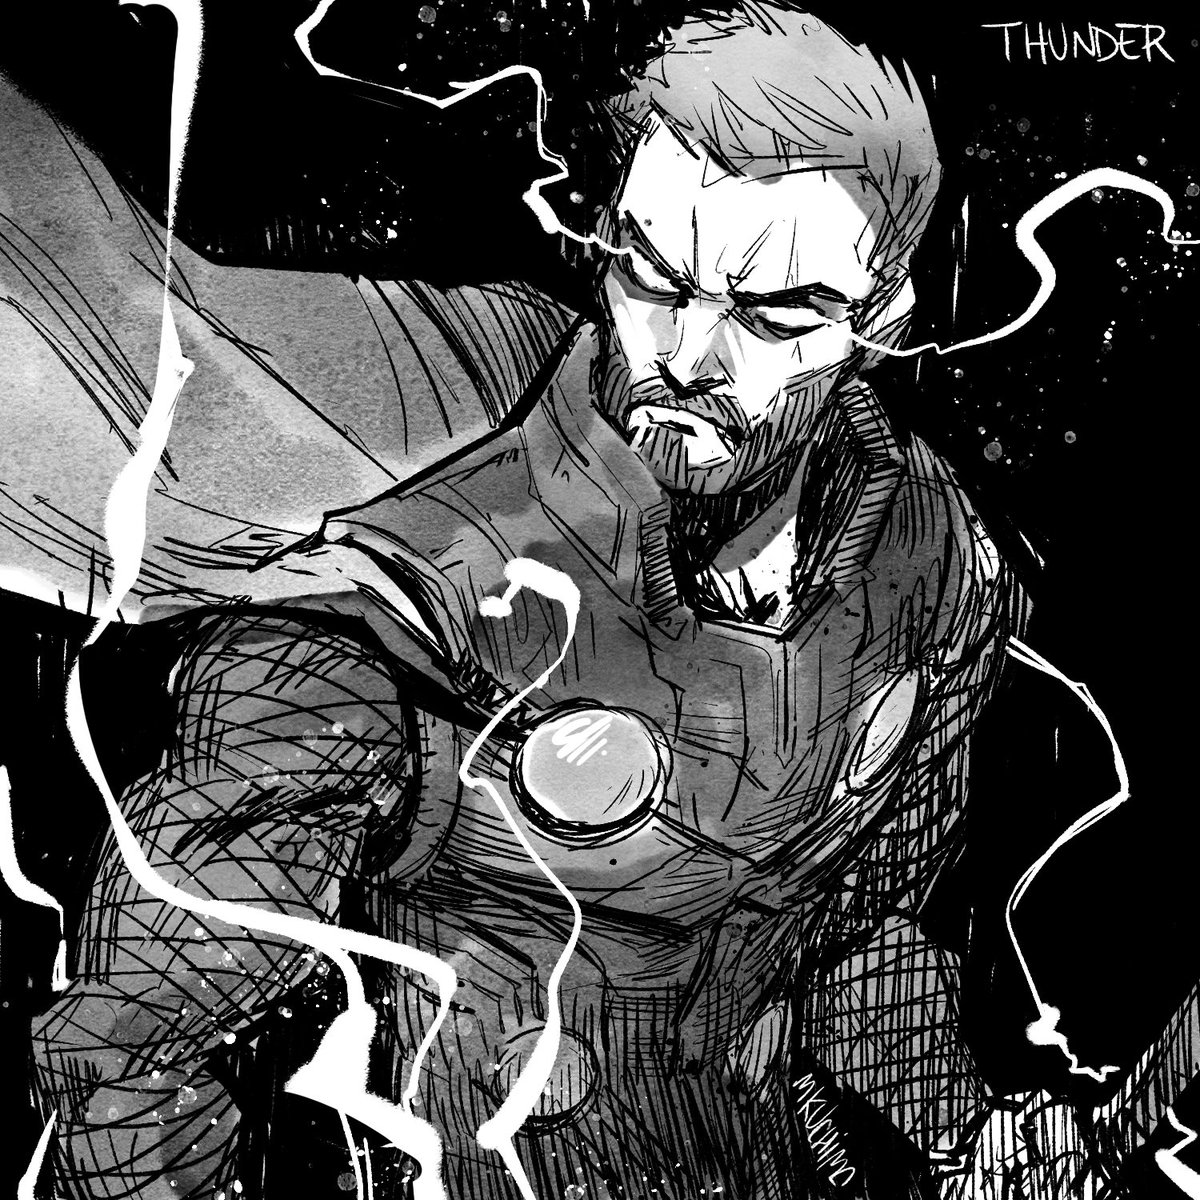 Hey! I made a fan art of the God of Hammer for todays #inktober! 
Hope you like it! ?
⛈️⛈️⛈️⛈️
#thor #marvel #mcu #fanart 